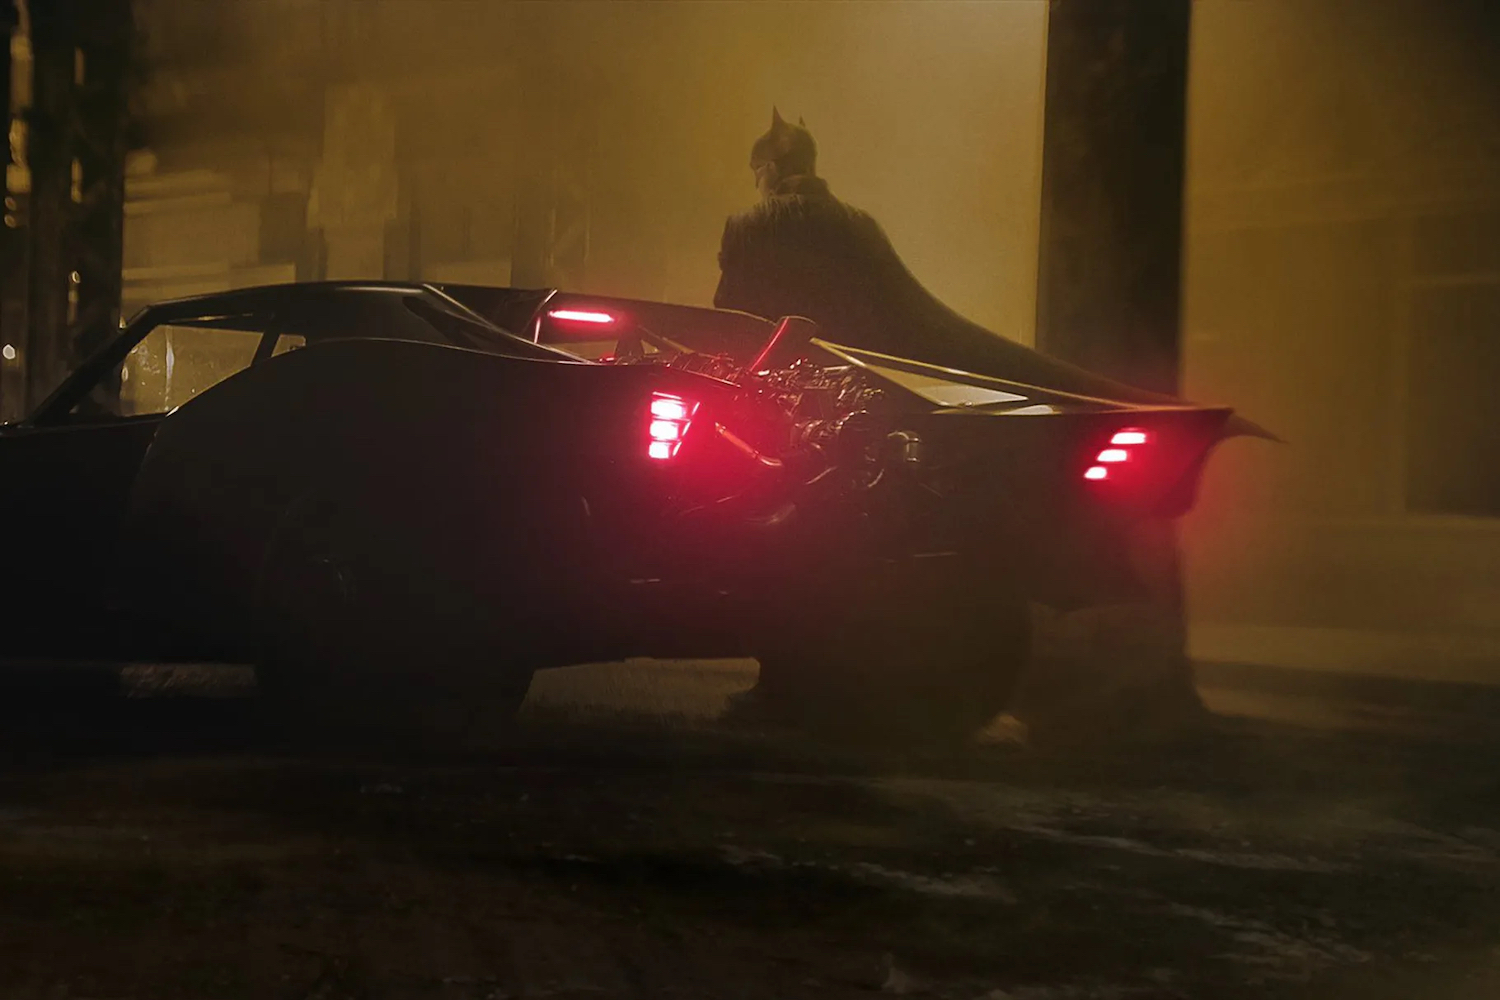 Robert Pattinson looks into the distance while standing next to his muscle car batmobile.